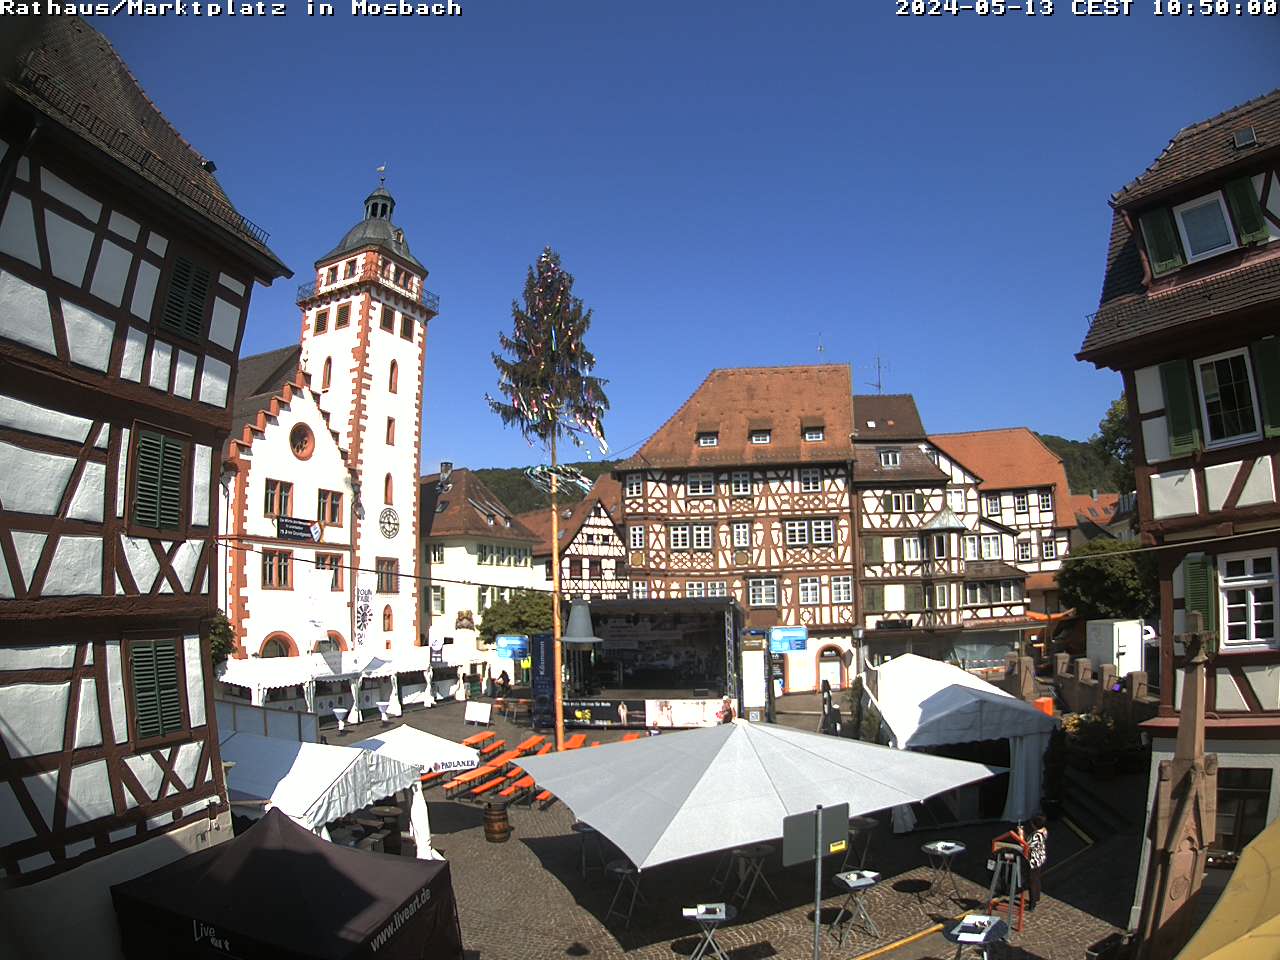 Mosbach Fre. 10:54